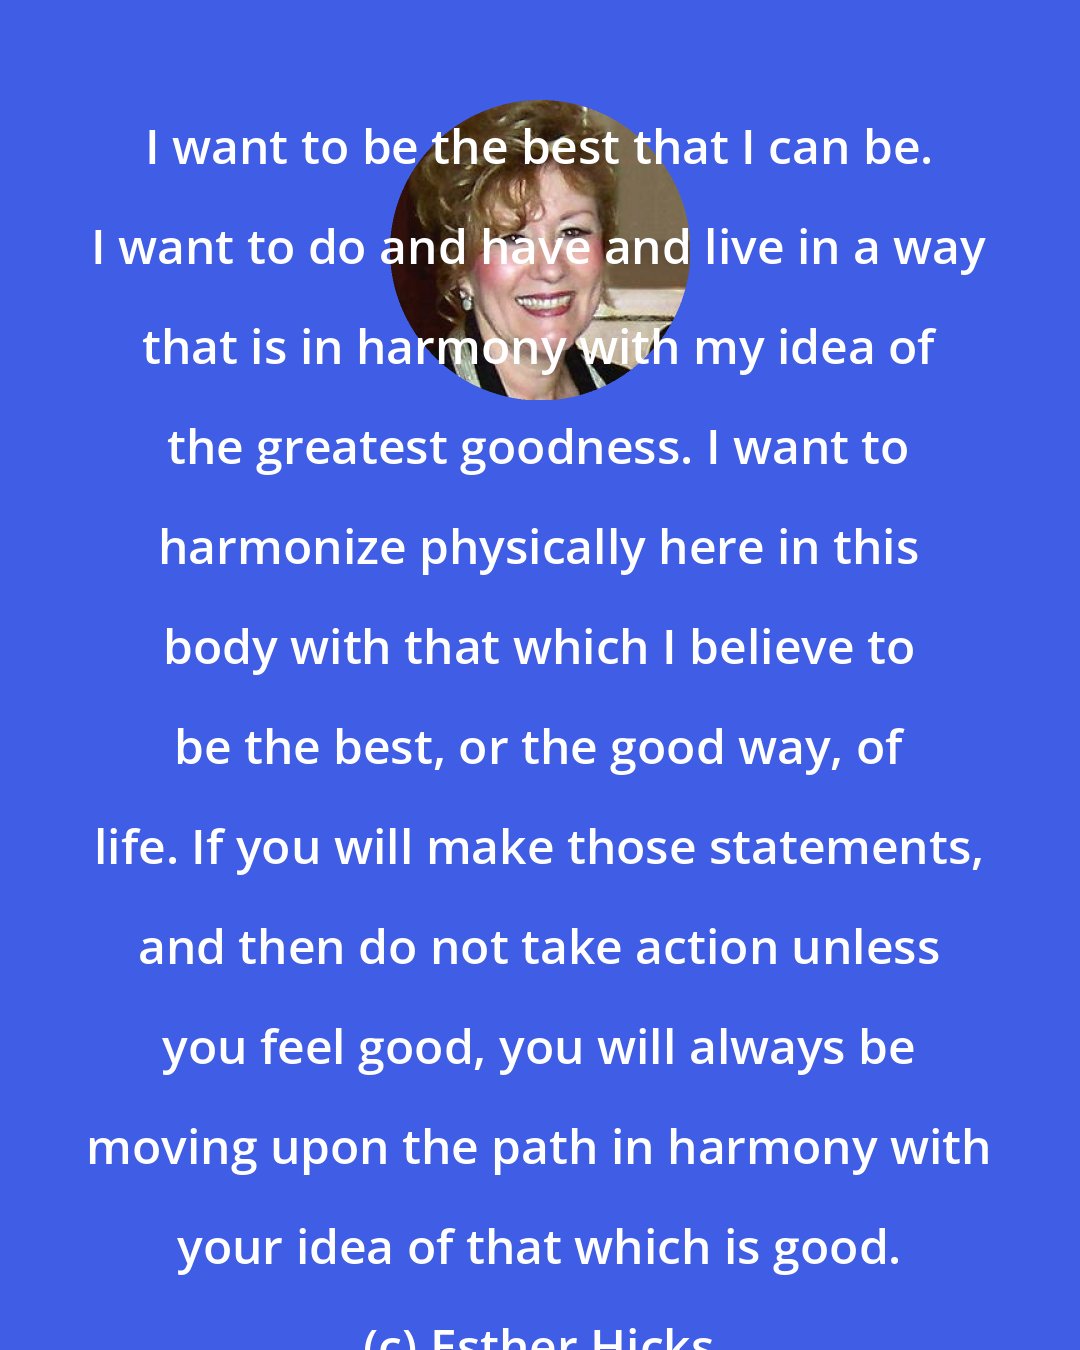 Esther Hicks: I want to be the best that I can be. I want to do and have and live in a way that is in harmony with my idea of the greatest goodness. I want to harmonize physically here in this body with that which I believe to be the best, or the good way, of life. If you will make those statements, and then do not take action unless you feel good, you will always be moving upon the path in harmony with your idea of that which is good.